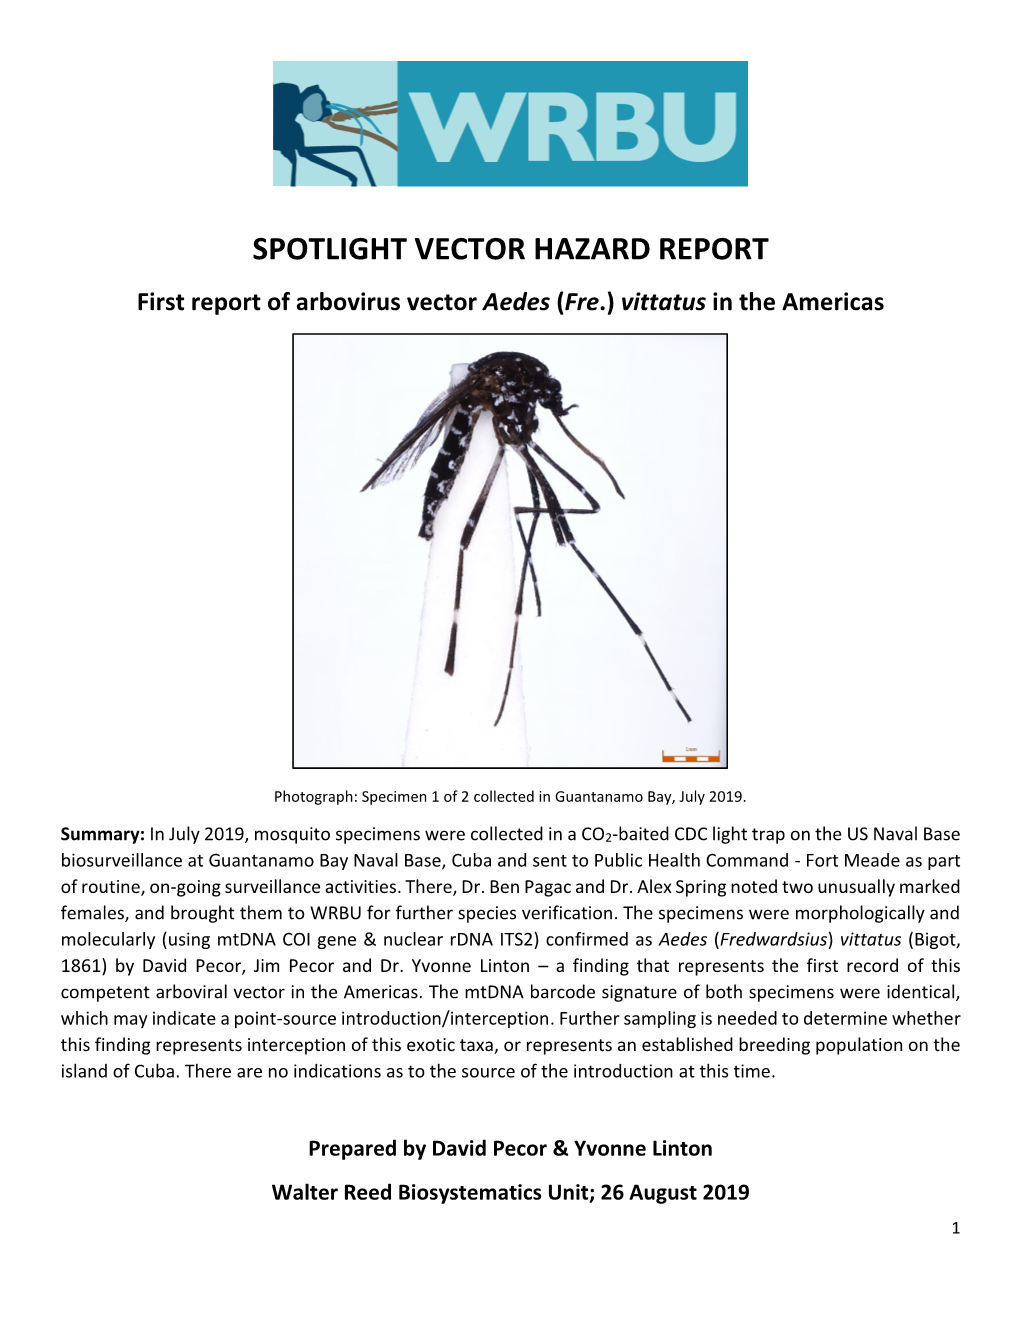 Aedes Vittatus Was Later Placed in the Aedes Subgenus Stegomyia